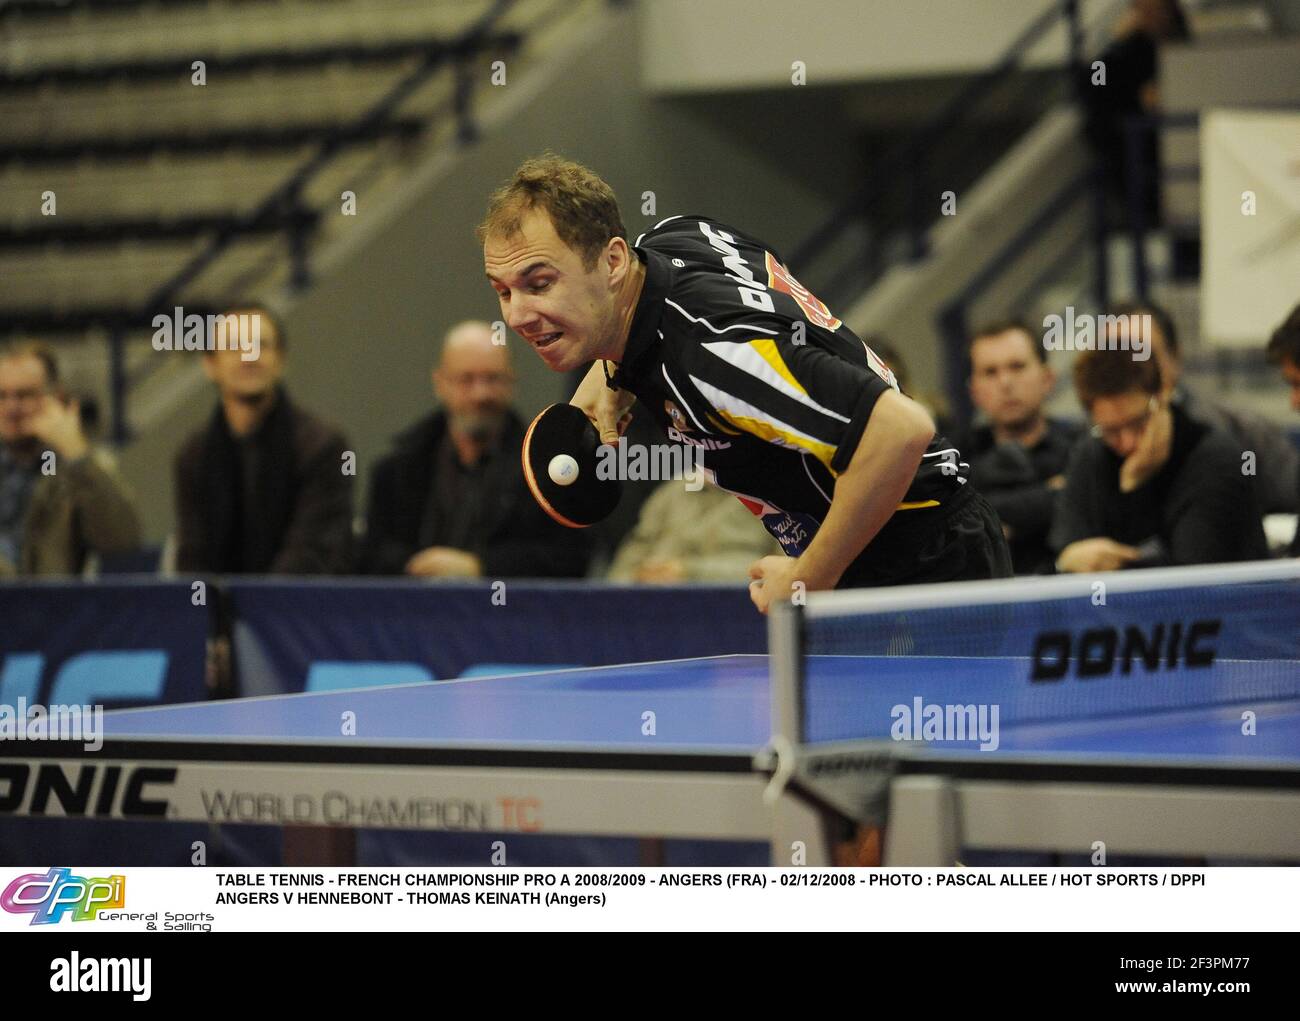 TABLE TENNIS - FRENCH CHAMPIONSHIP PRO A 2008/2009 - ANGERS (FRA) -  02/12/2008 - PHOTO : PASCAL ALLEE / HOT SPORTS / DPPI ANGERS V HENNEBONT -  MAGNUS MOLIN (Angers Stock Photo - Alamy